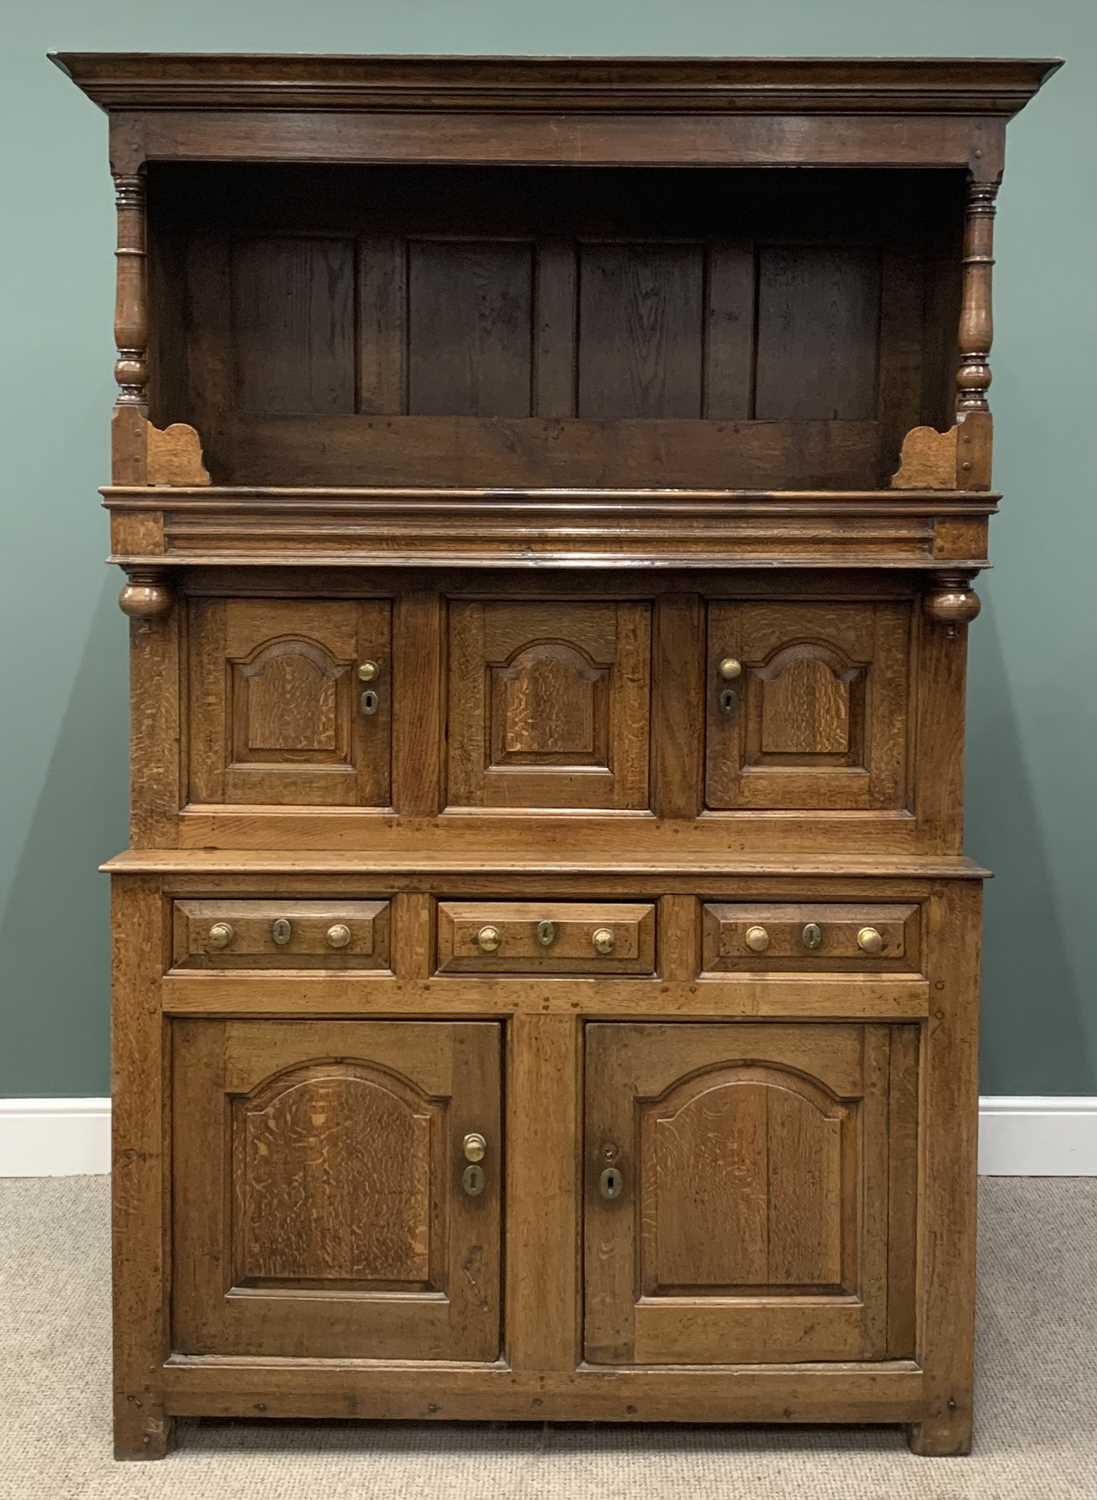 18TH CENTURY WELSH TRIDARN of even chestnut colour, finely detailed and constructed, of good